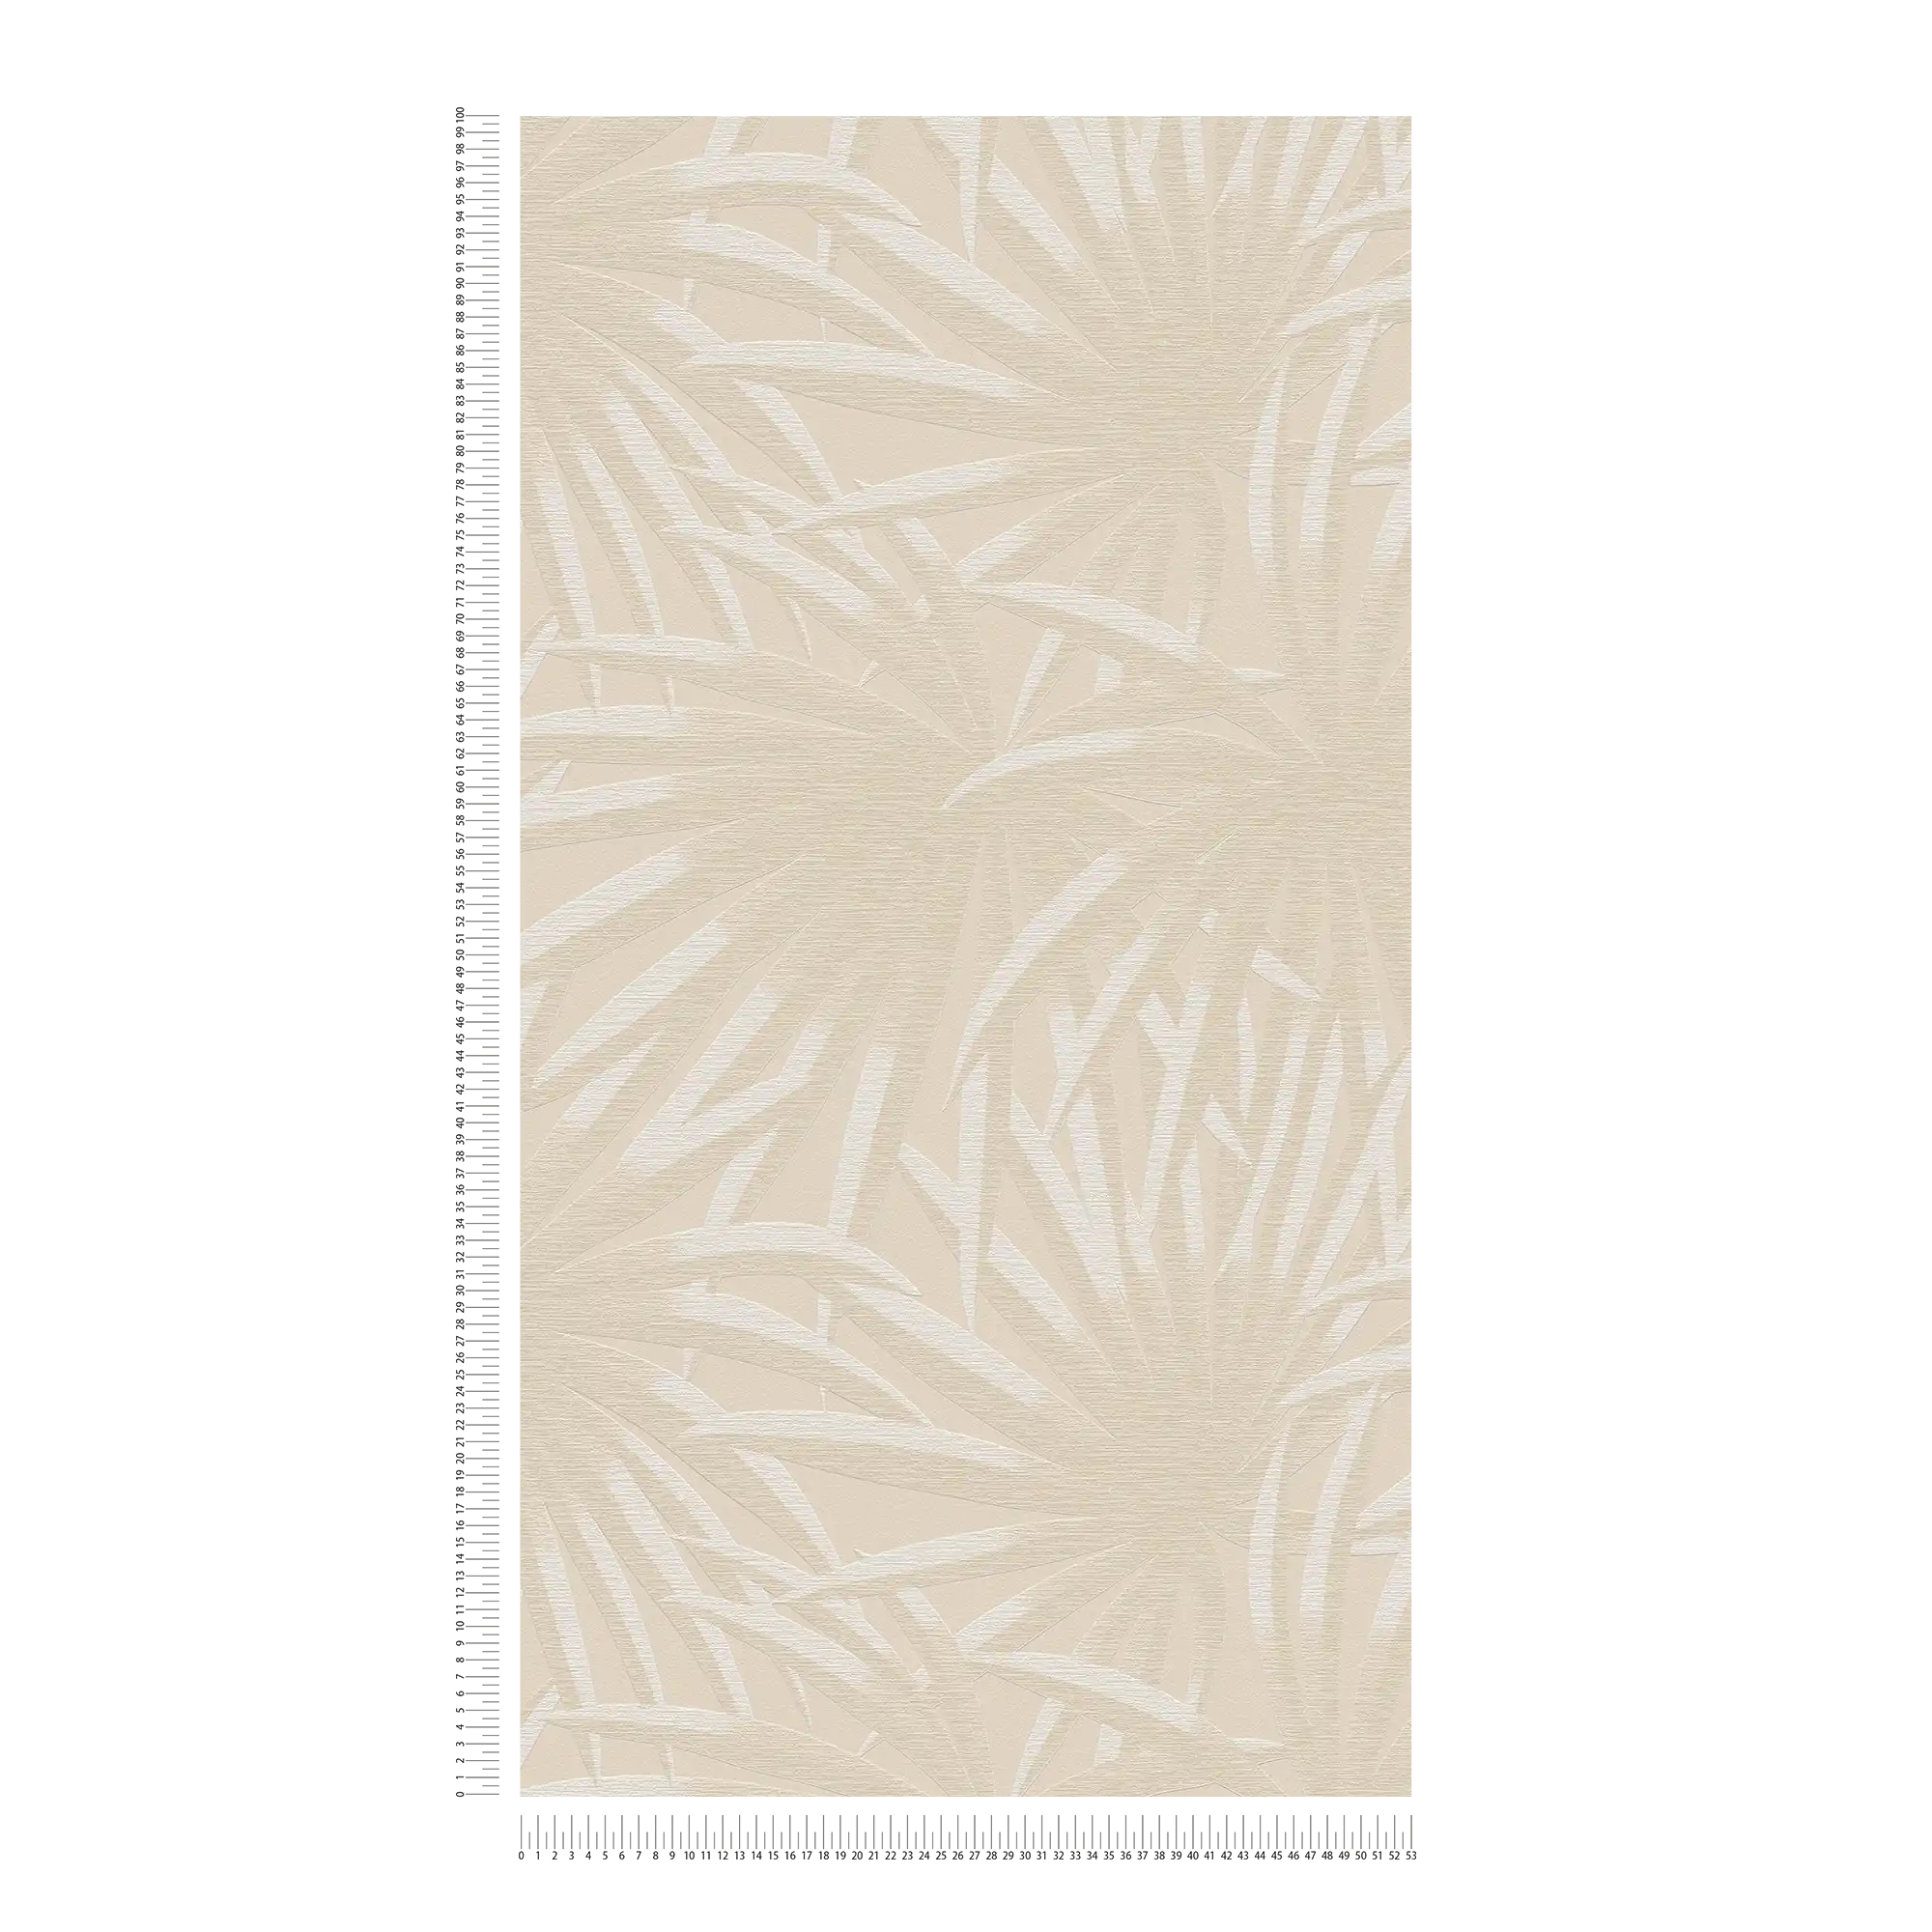             Floral non-woven wallpaper with palm leaves - beige, white
        